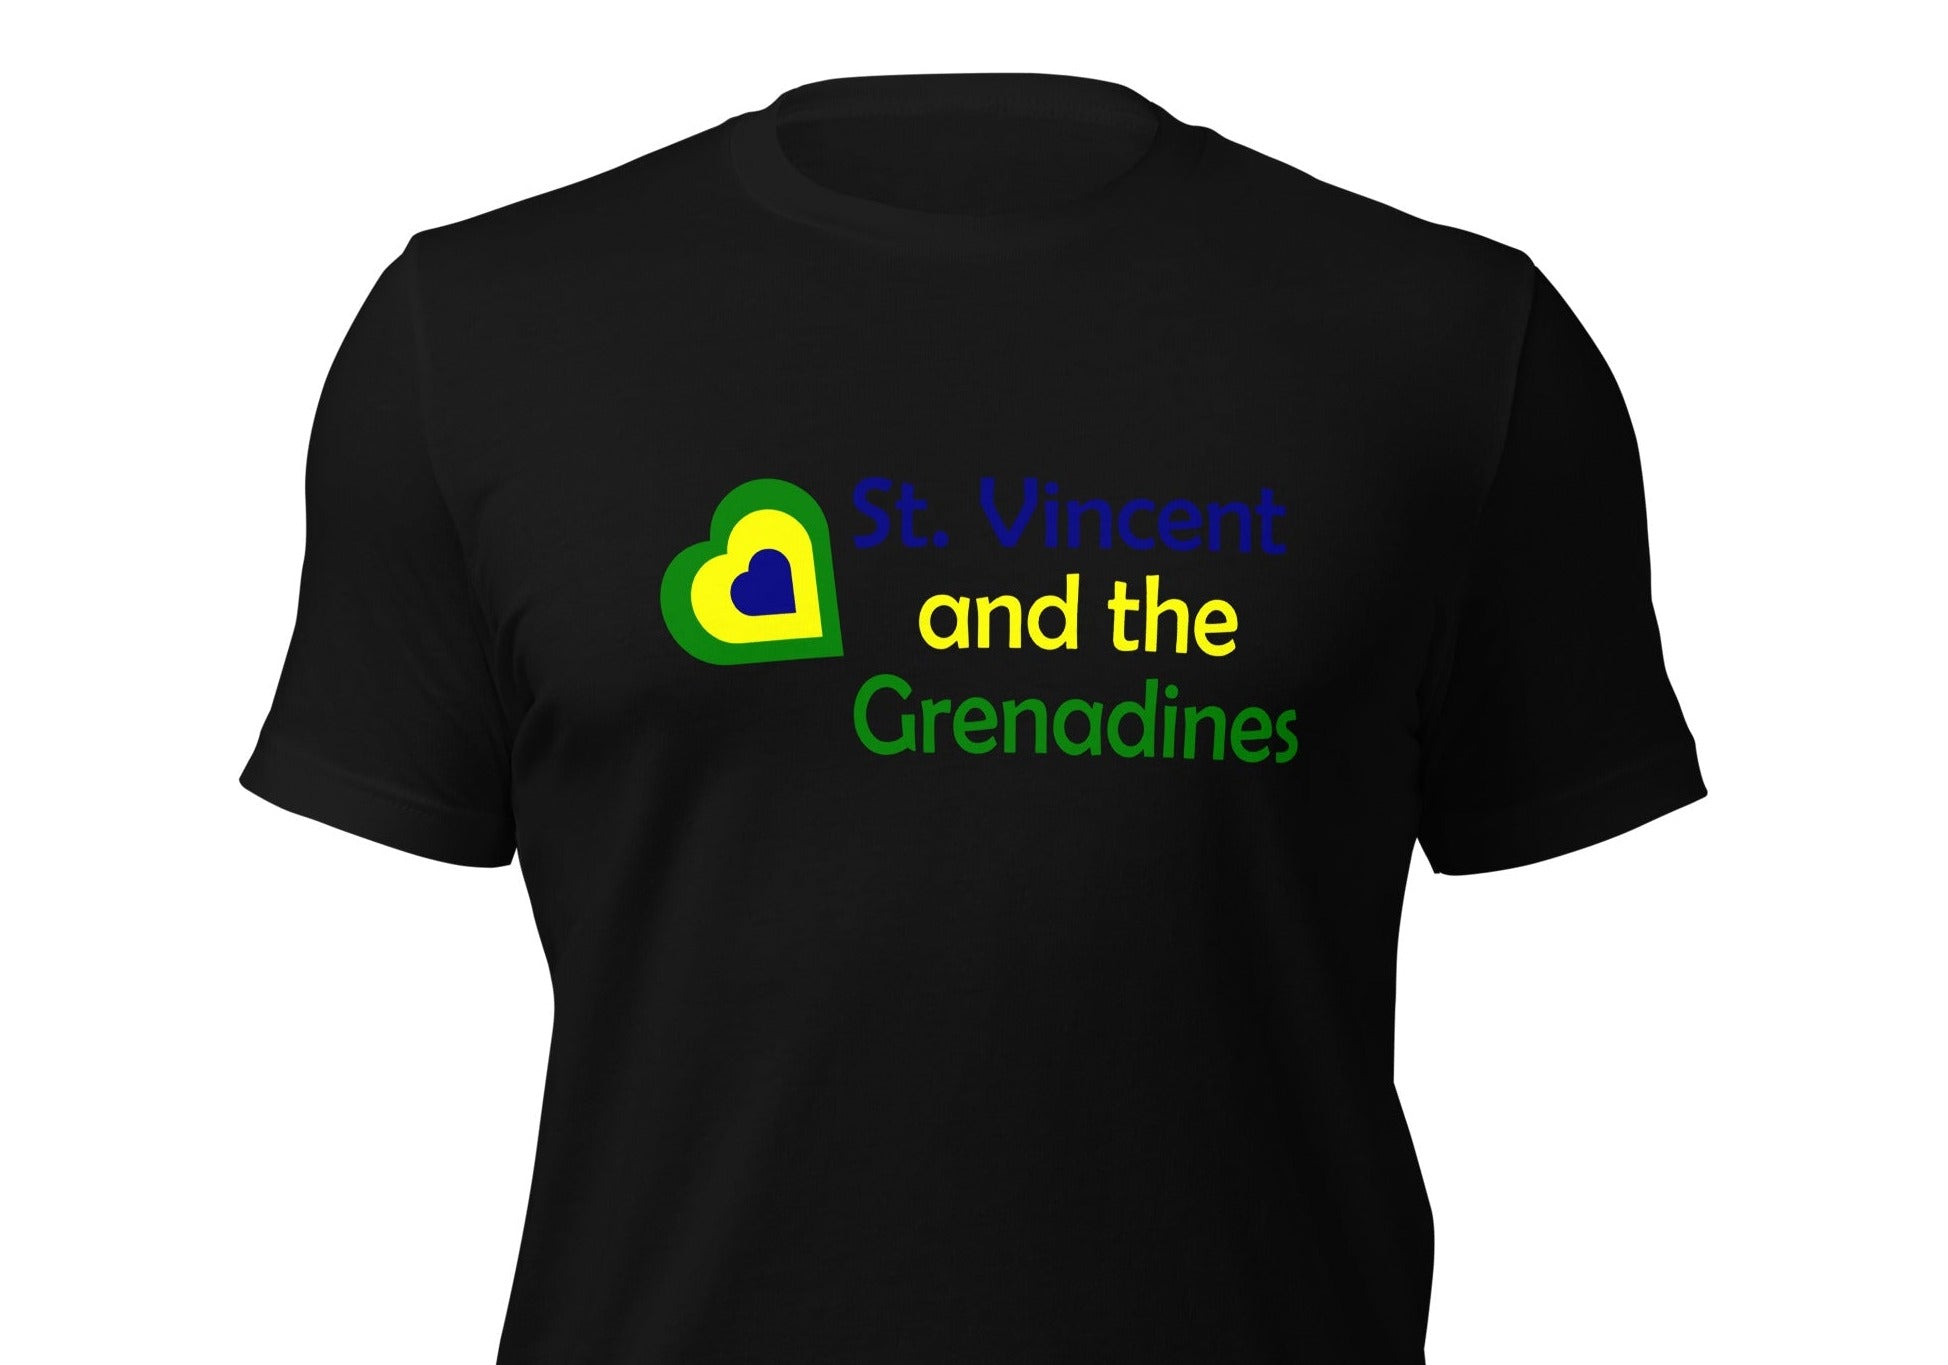 t-shirt with the caption St. Vincent and the Grenadines as well as a heart all in the national colors